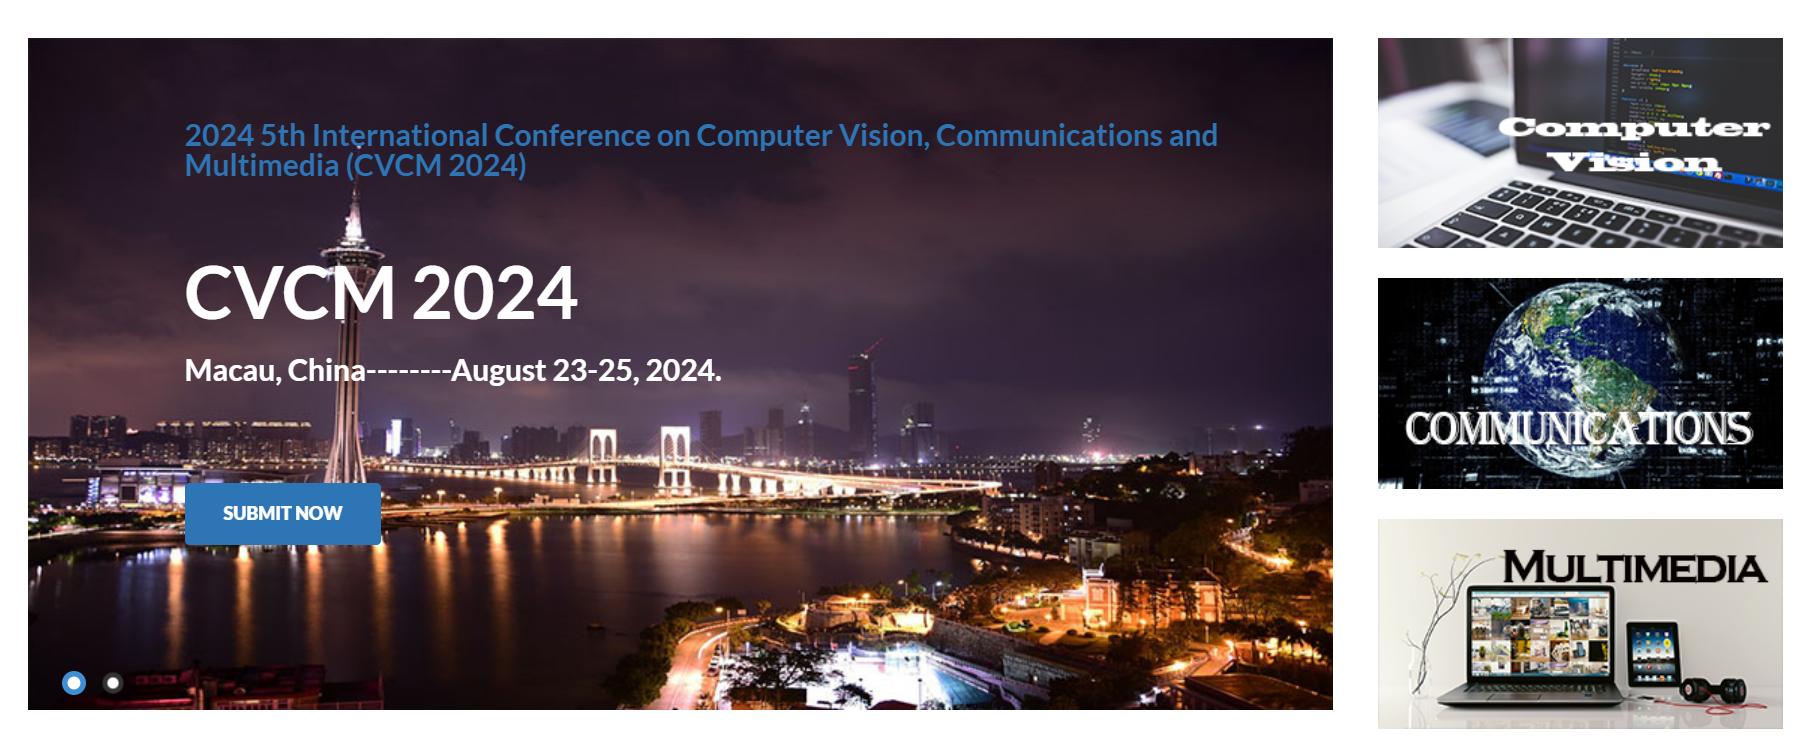 2024 5th International Conference on Computer Vision, Communications and Multimedia (CVCM 2024) -EI Compendex, Macau